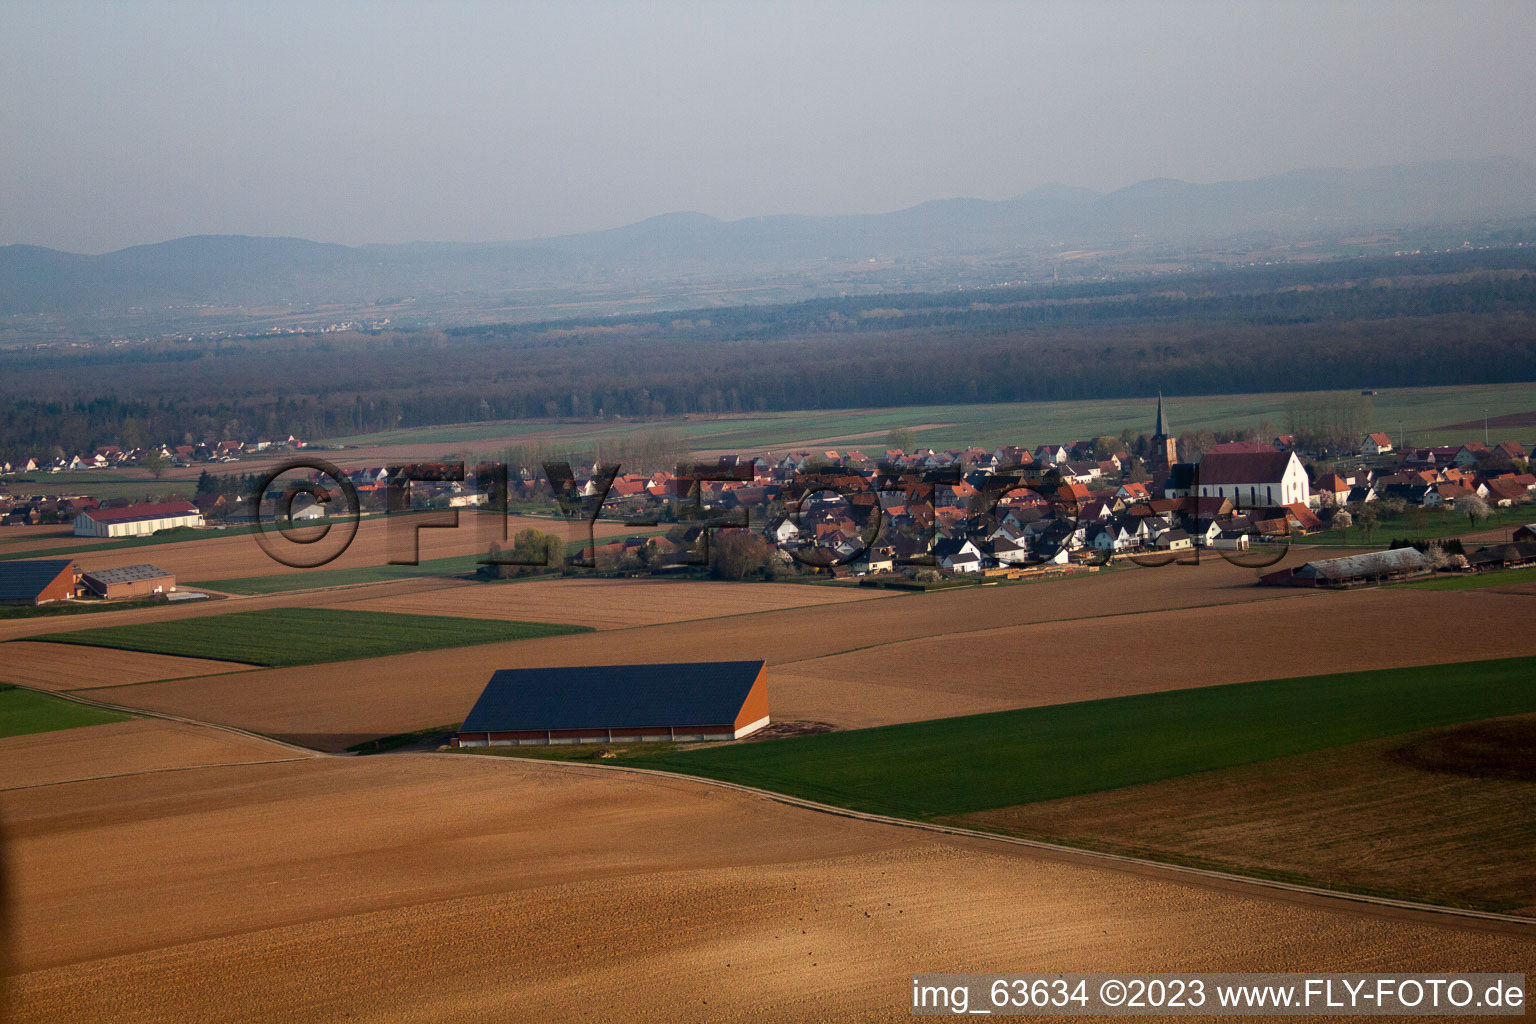 Aerial photograpy of Schleithal in the state Bas-Rhin, France